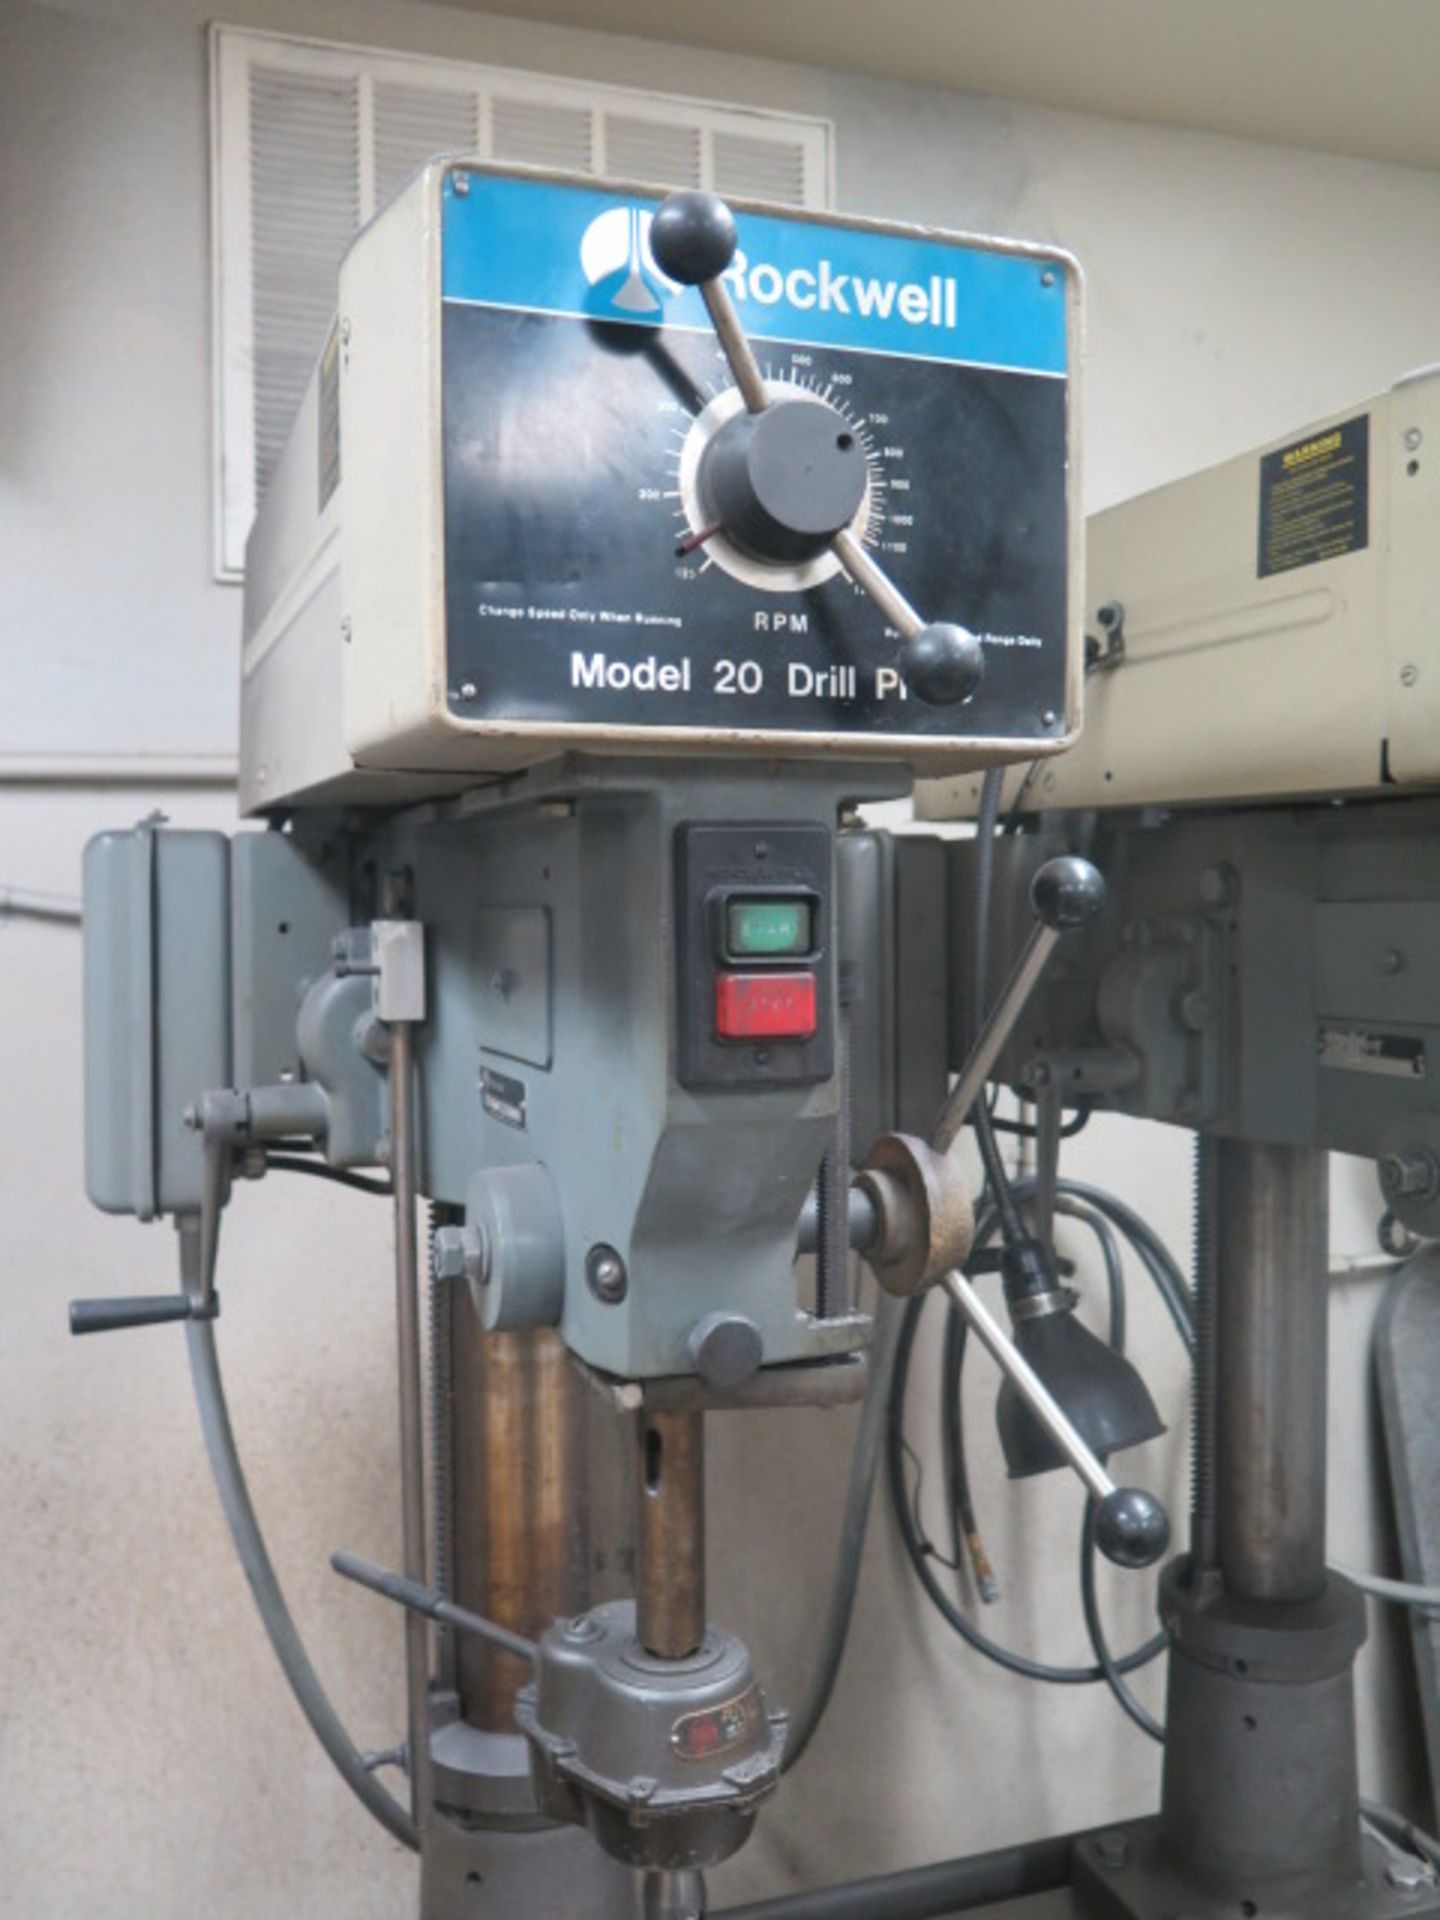 Rockwell 2-Head Gang Drill Press w/ Rockwell mdl. 20 Variable Speed Heads, 125-1250 Dial RPM, 24” - Image 3 of 7